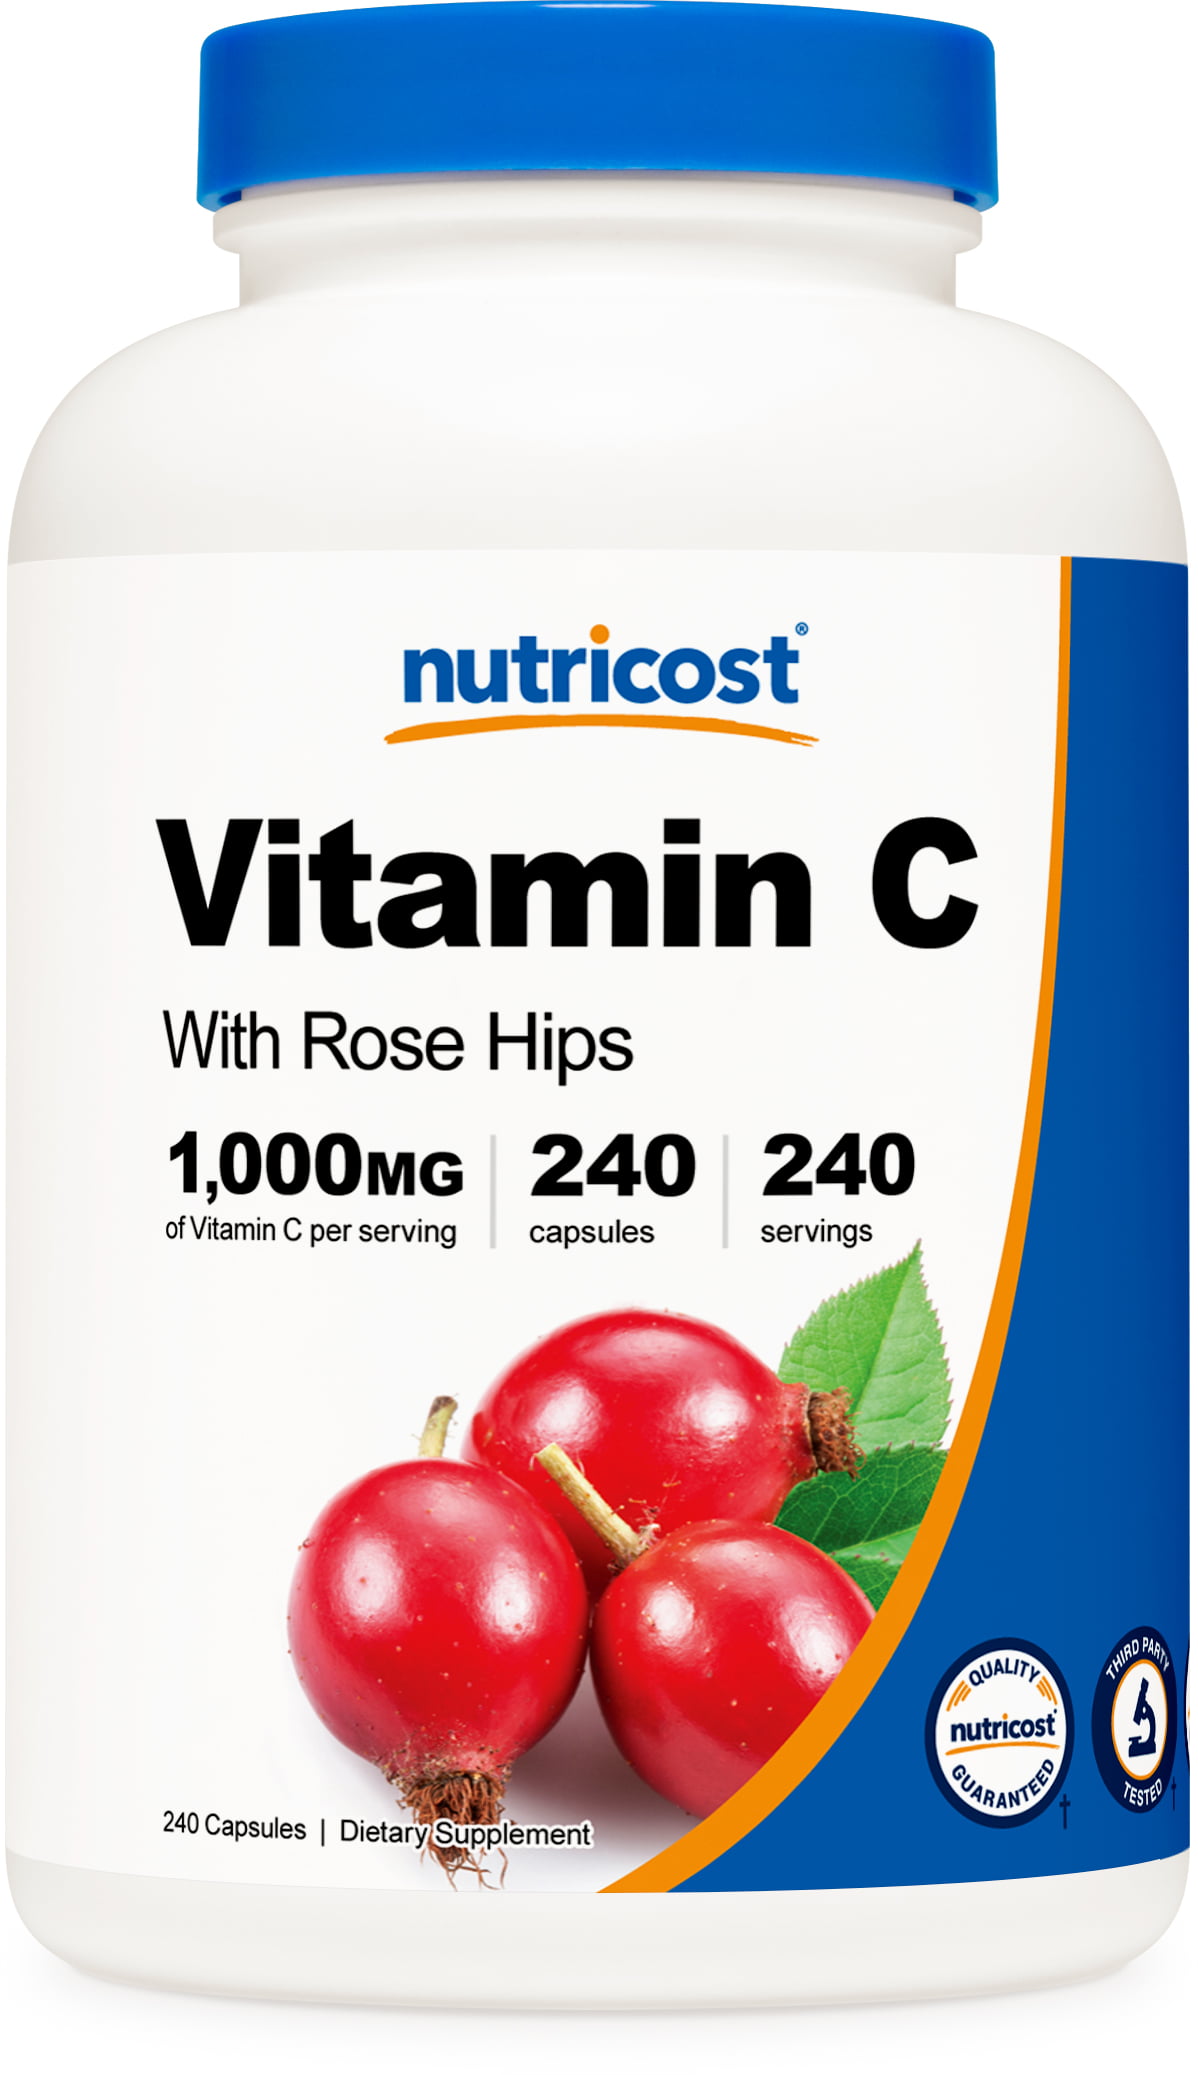 Nutricost Vitamin C with Rose Hips 1025mg, 240 Capsules - Non-GMO, Gluten Free, Vitamin C Supplement